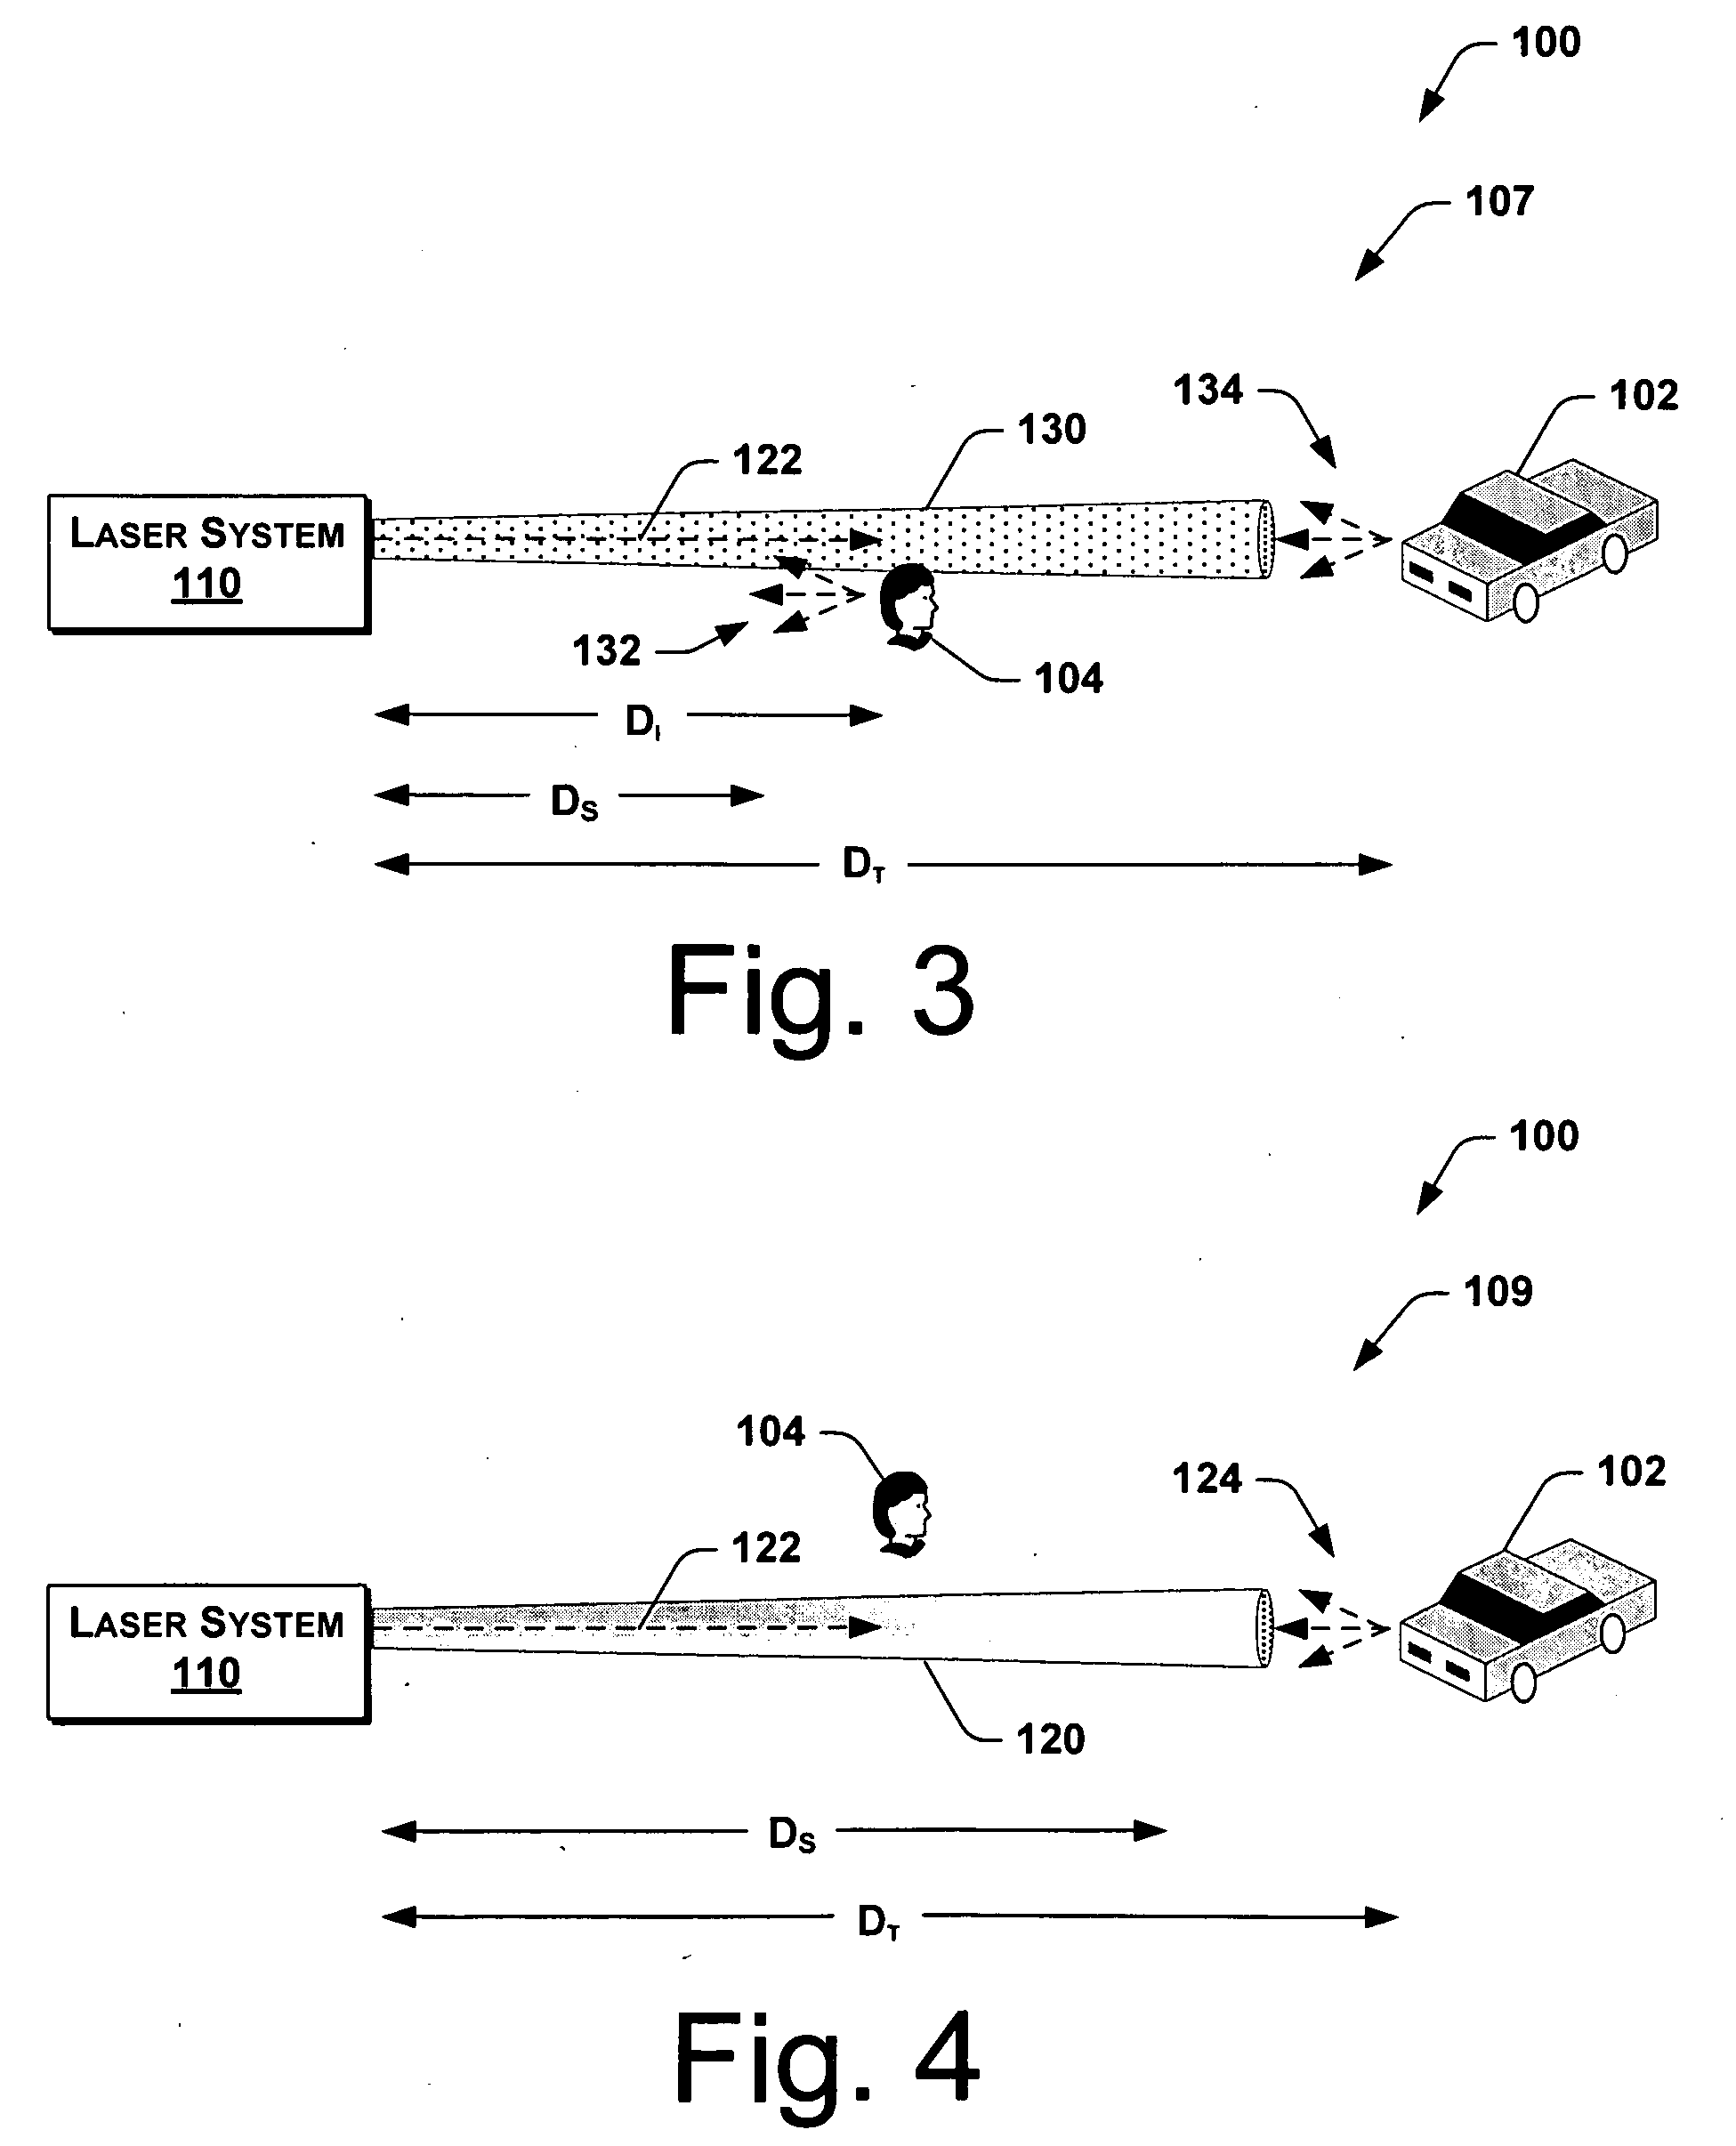 Control Modules for Laser Systems Having Auto-Ranging and Control Capability